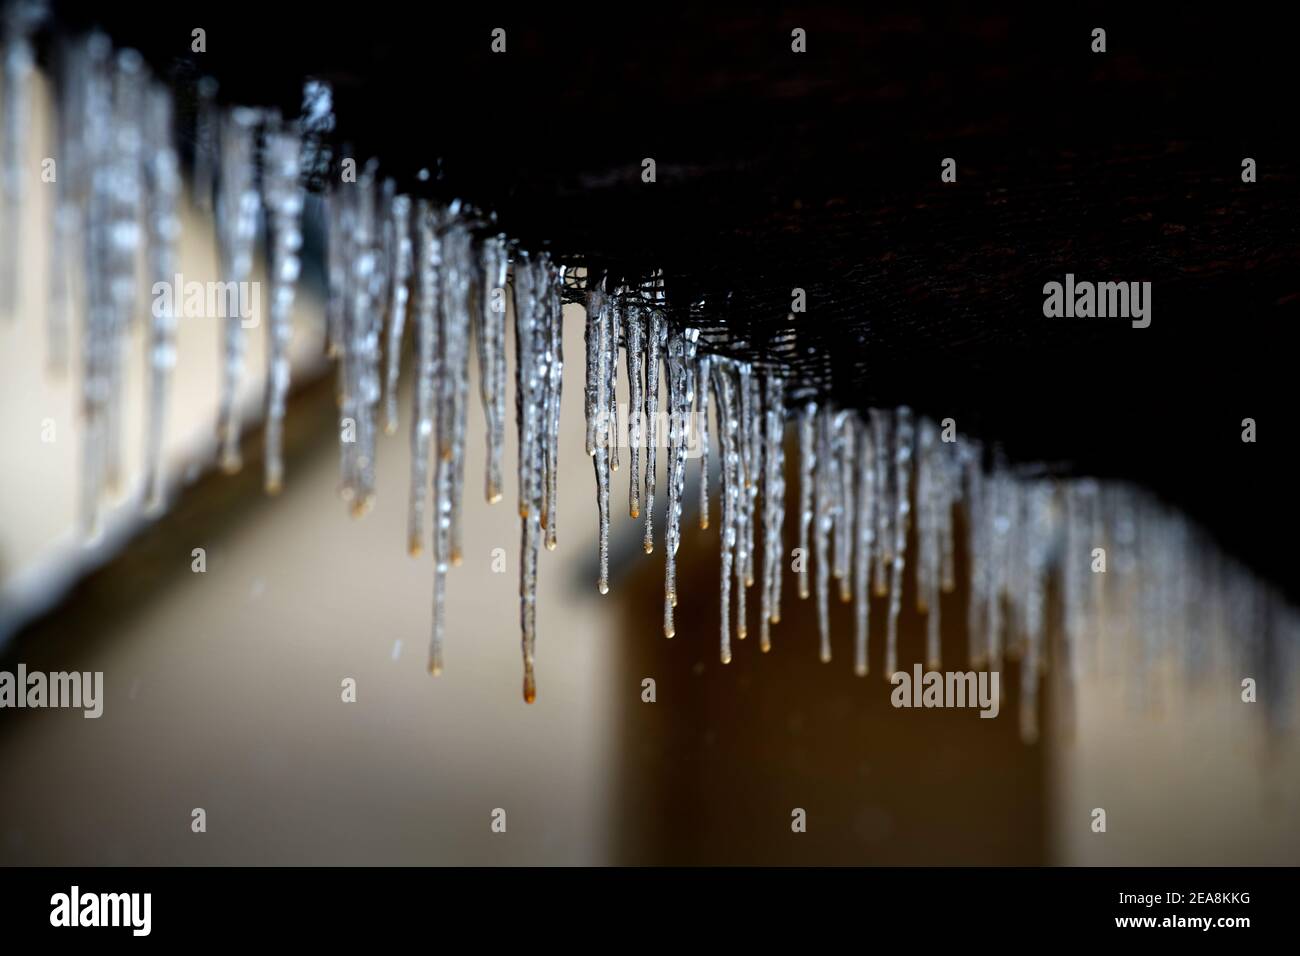 Thaxted Essex UK Snow conditions Winter Weather conditions 8 February 2021 Icicles Beast from the East II Le condizioni invernali della neve colpiscono l'Inghilterra orientale Foto Stock